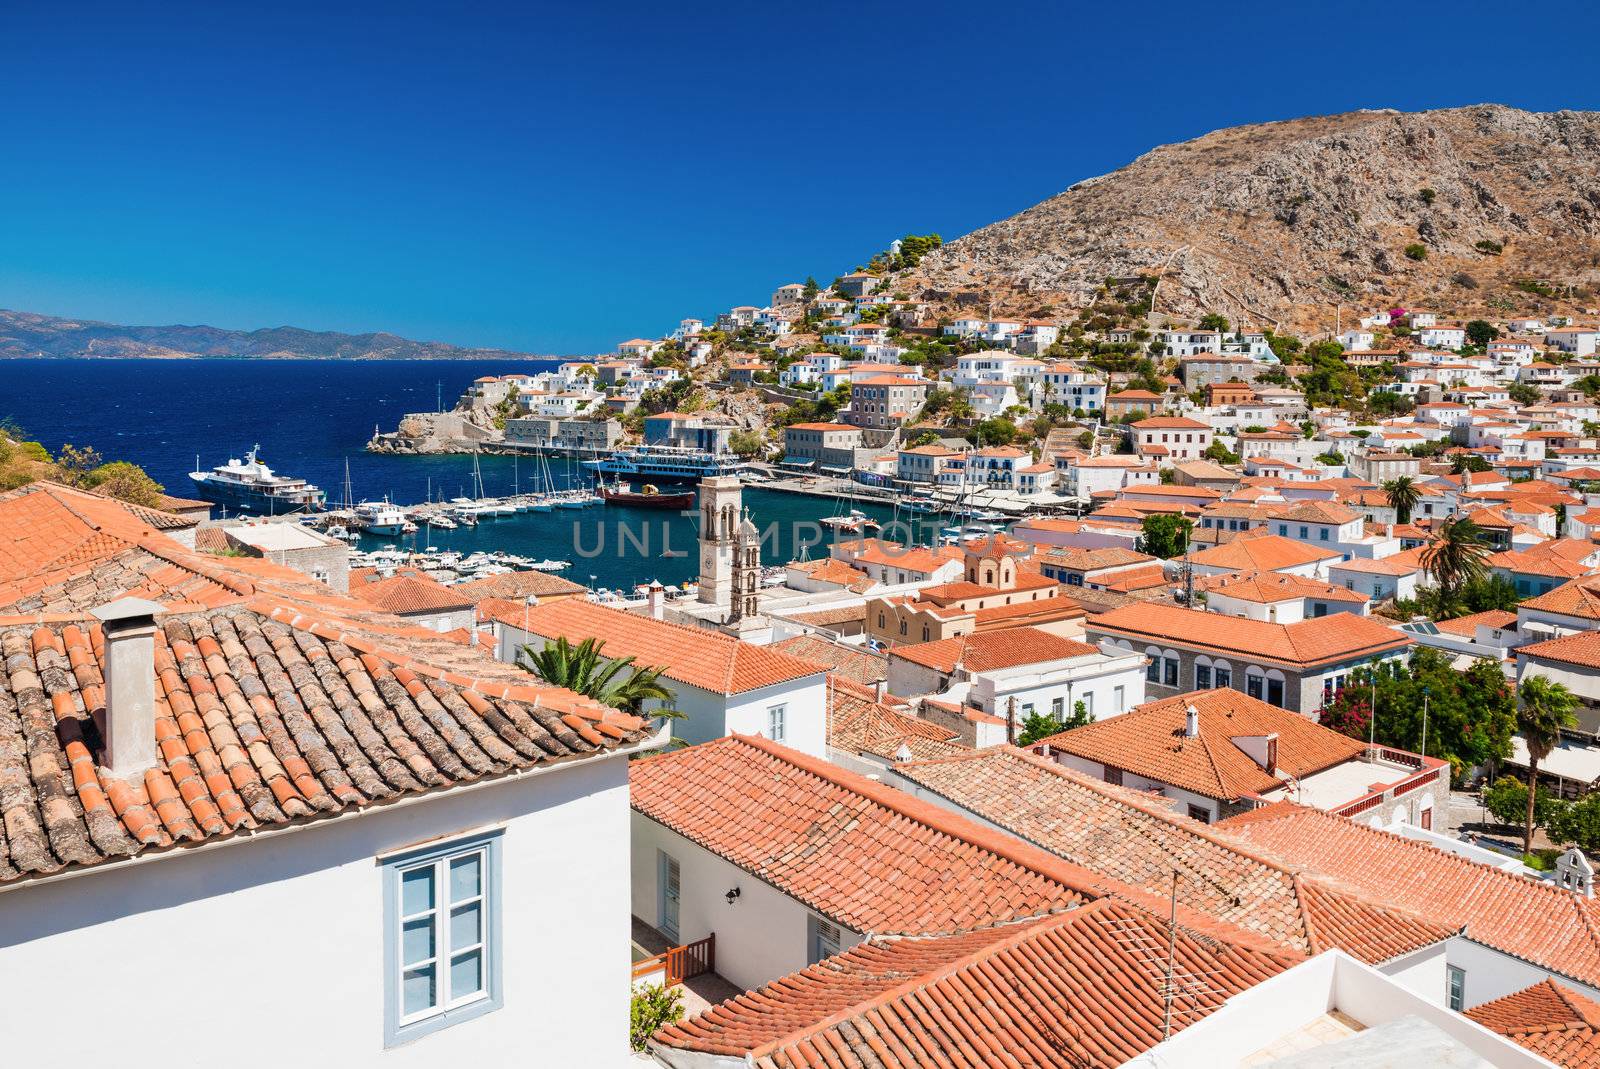 Overview of the island of Hydra, Greece by akarelias